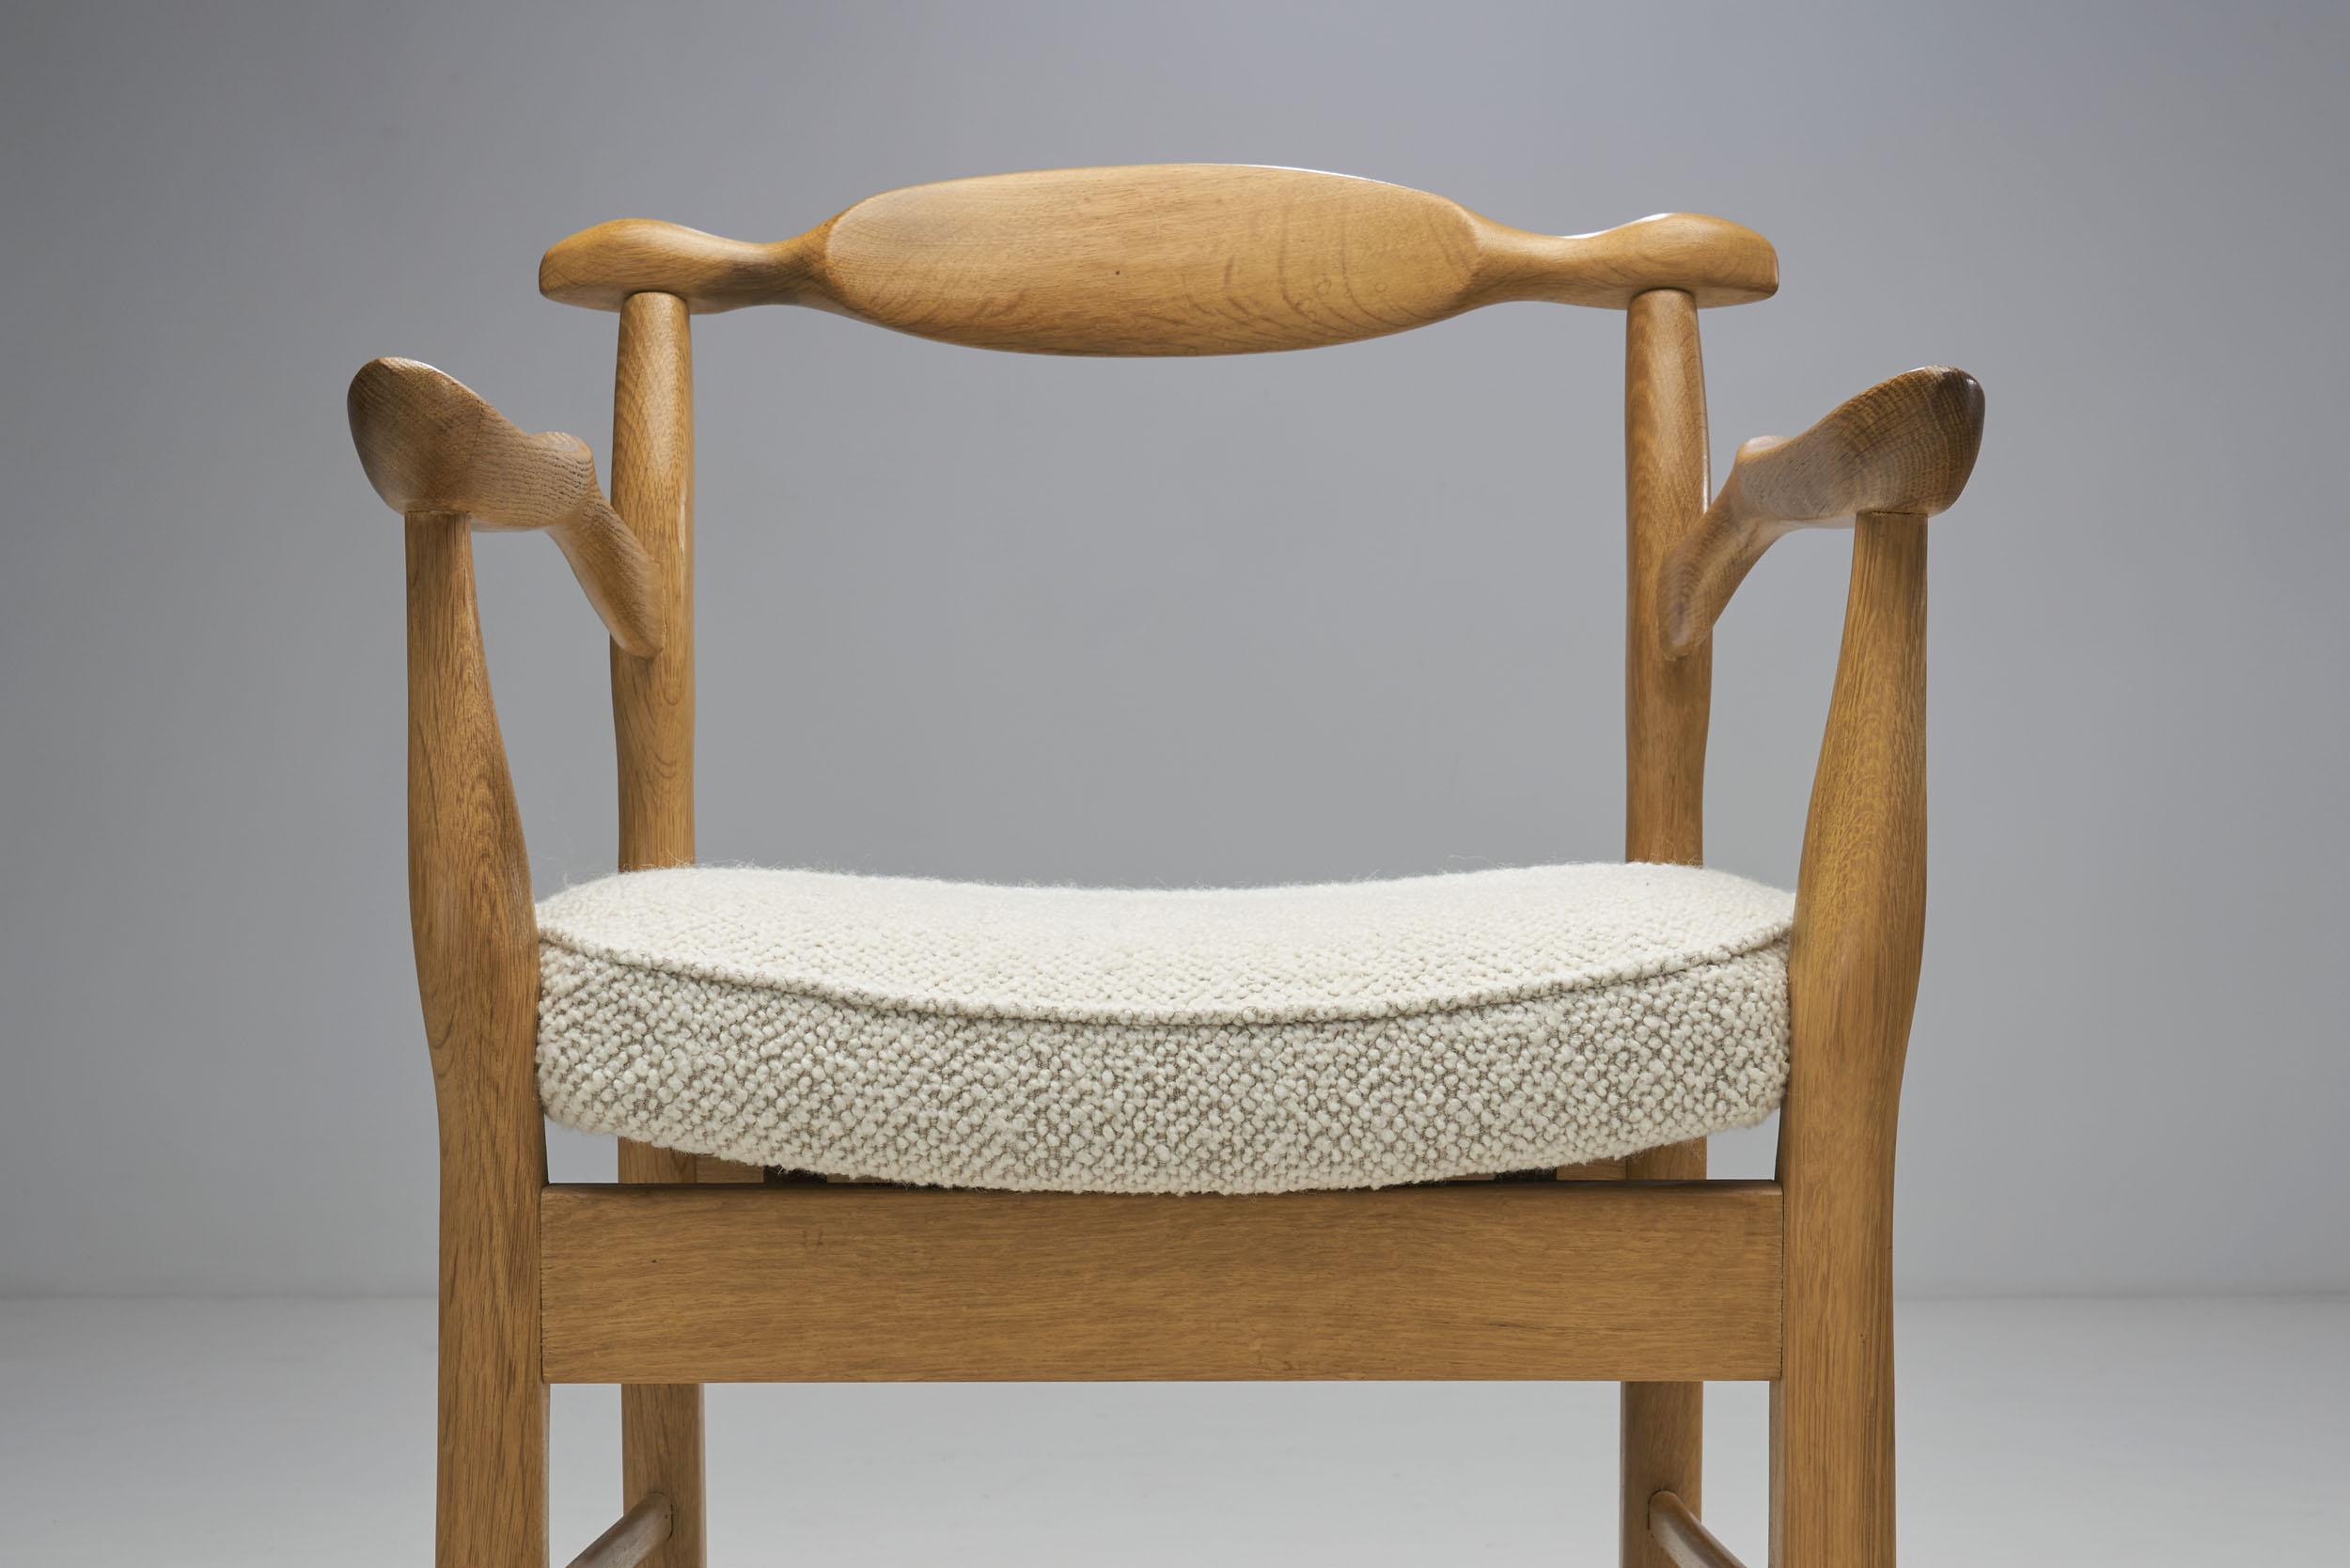 Mid-20th Century Guillerme et Chambron “Bridge Fumay” Dining Chairs for Votre Maison, France 1960